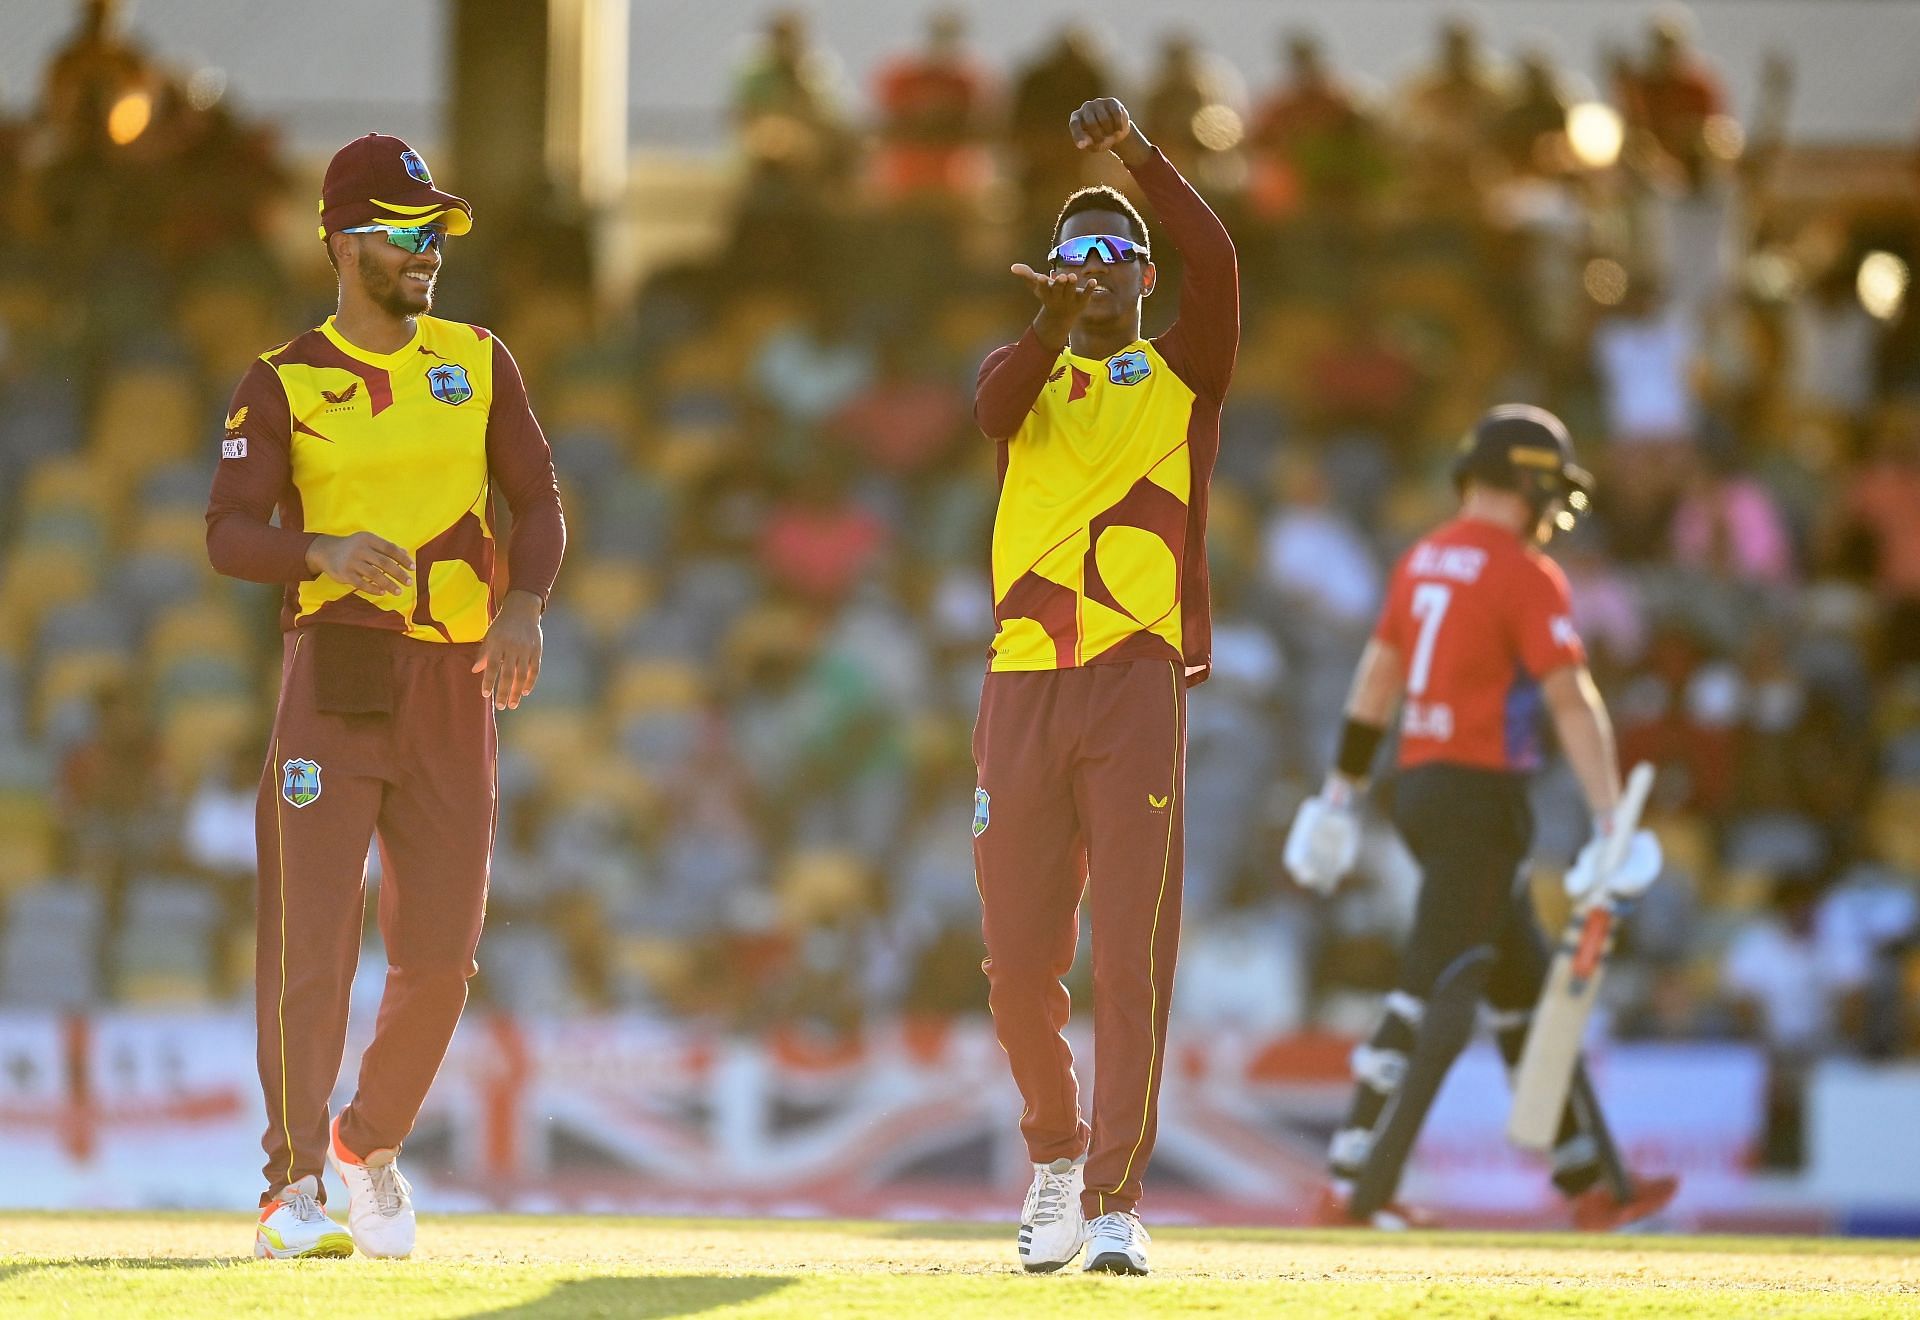 West Indies are currently playing a T20I series against England at home